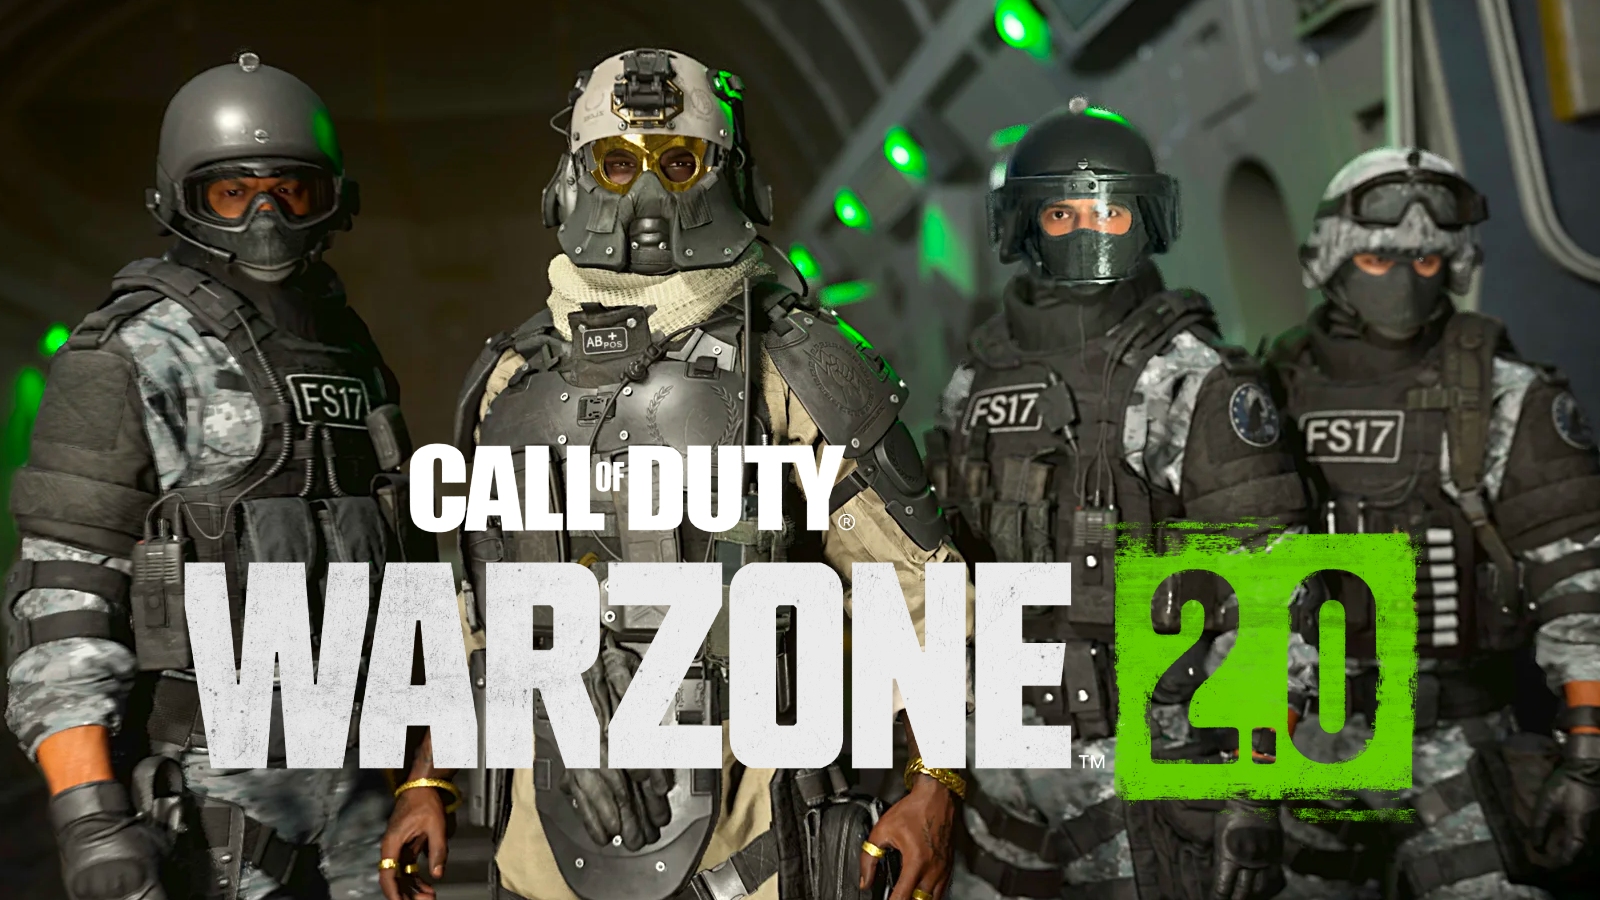 Warzone 2 Steam player count has spooked some players, as faith in the game  falters